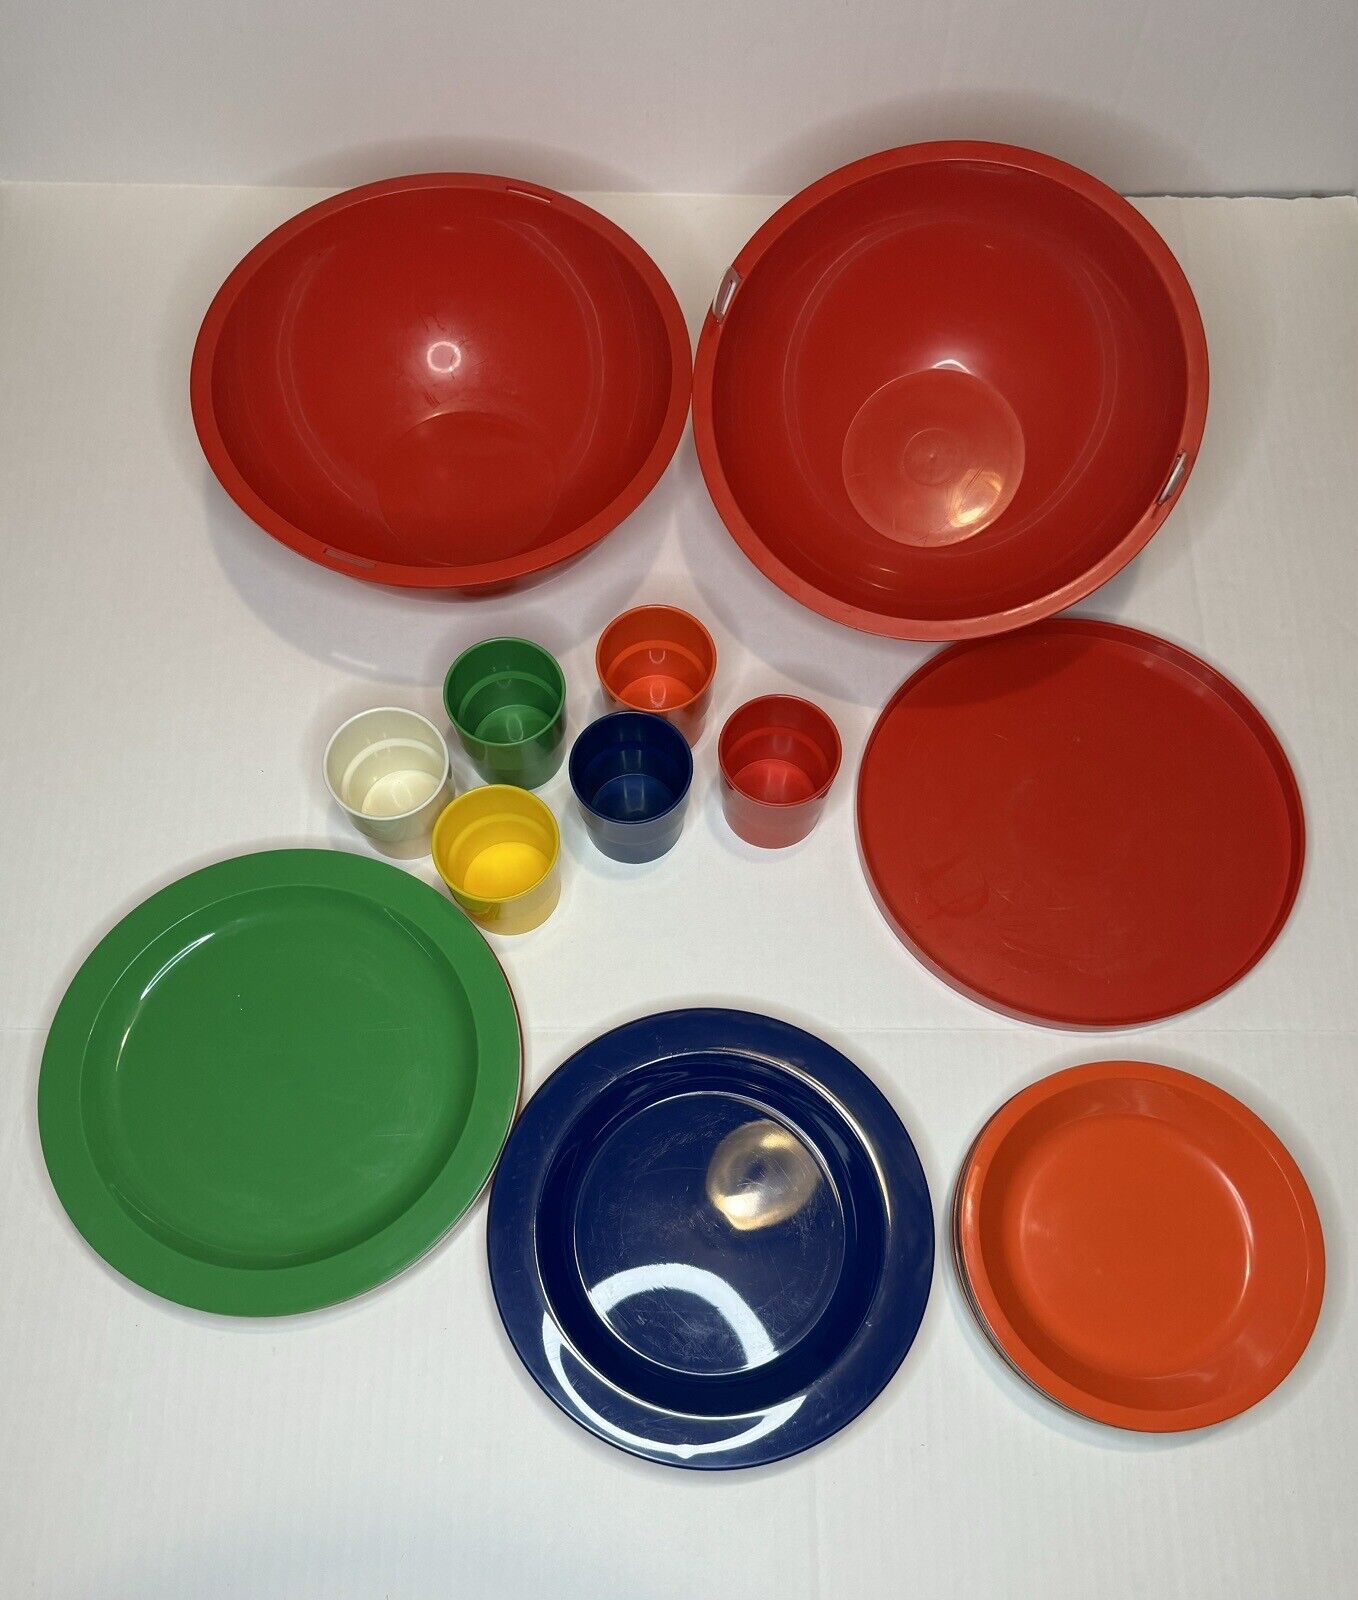 Picnic PARTY BALL Ingrid Chicago Camping 6 Bowls Plates Cups Tray 2 Large Bowls